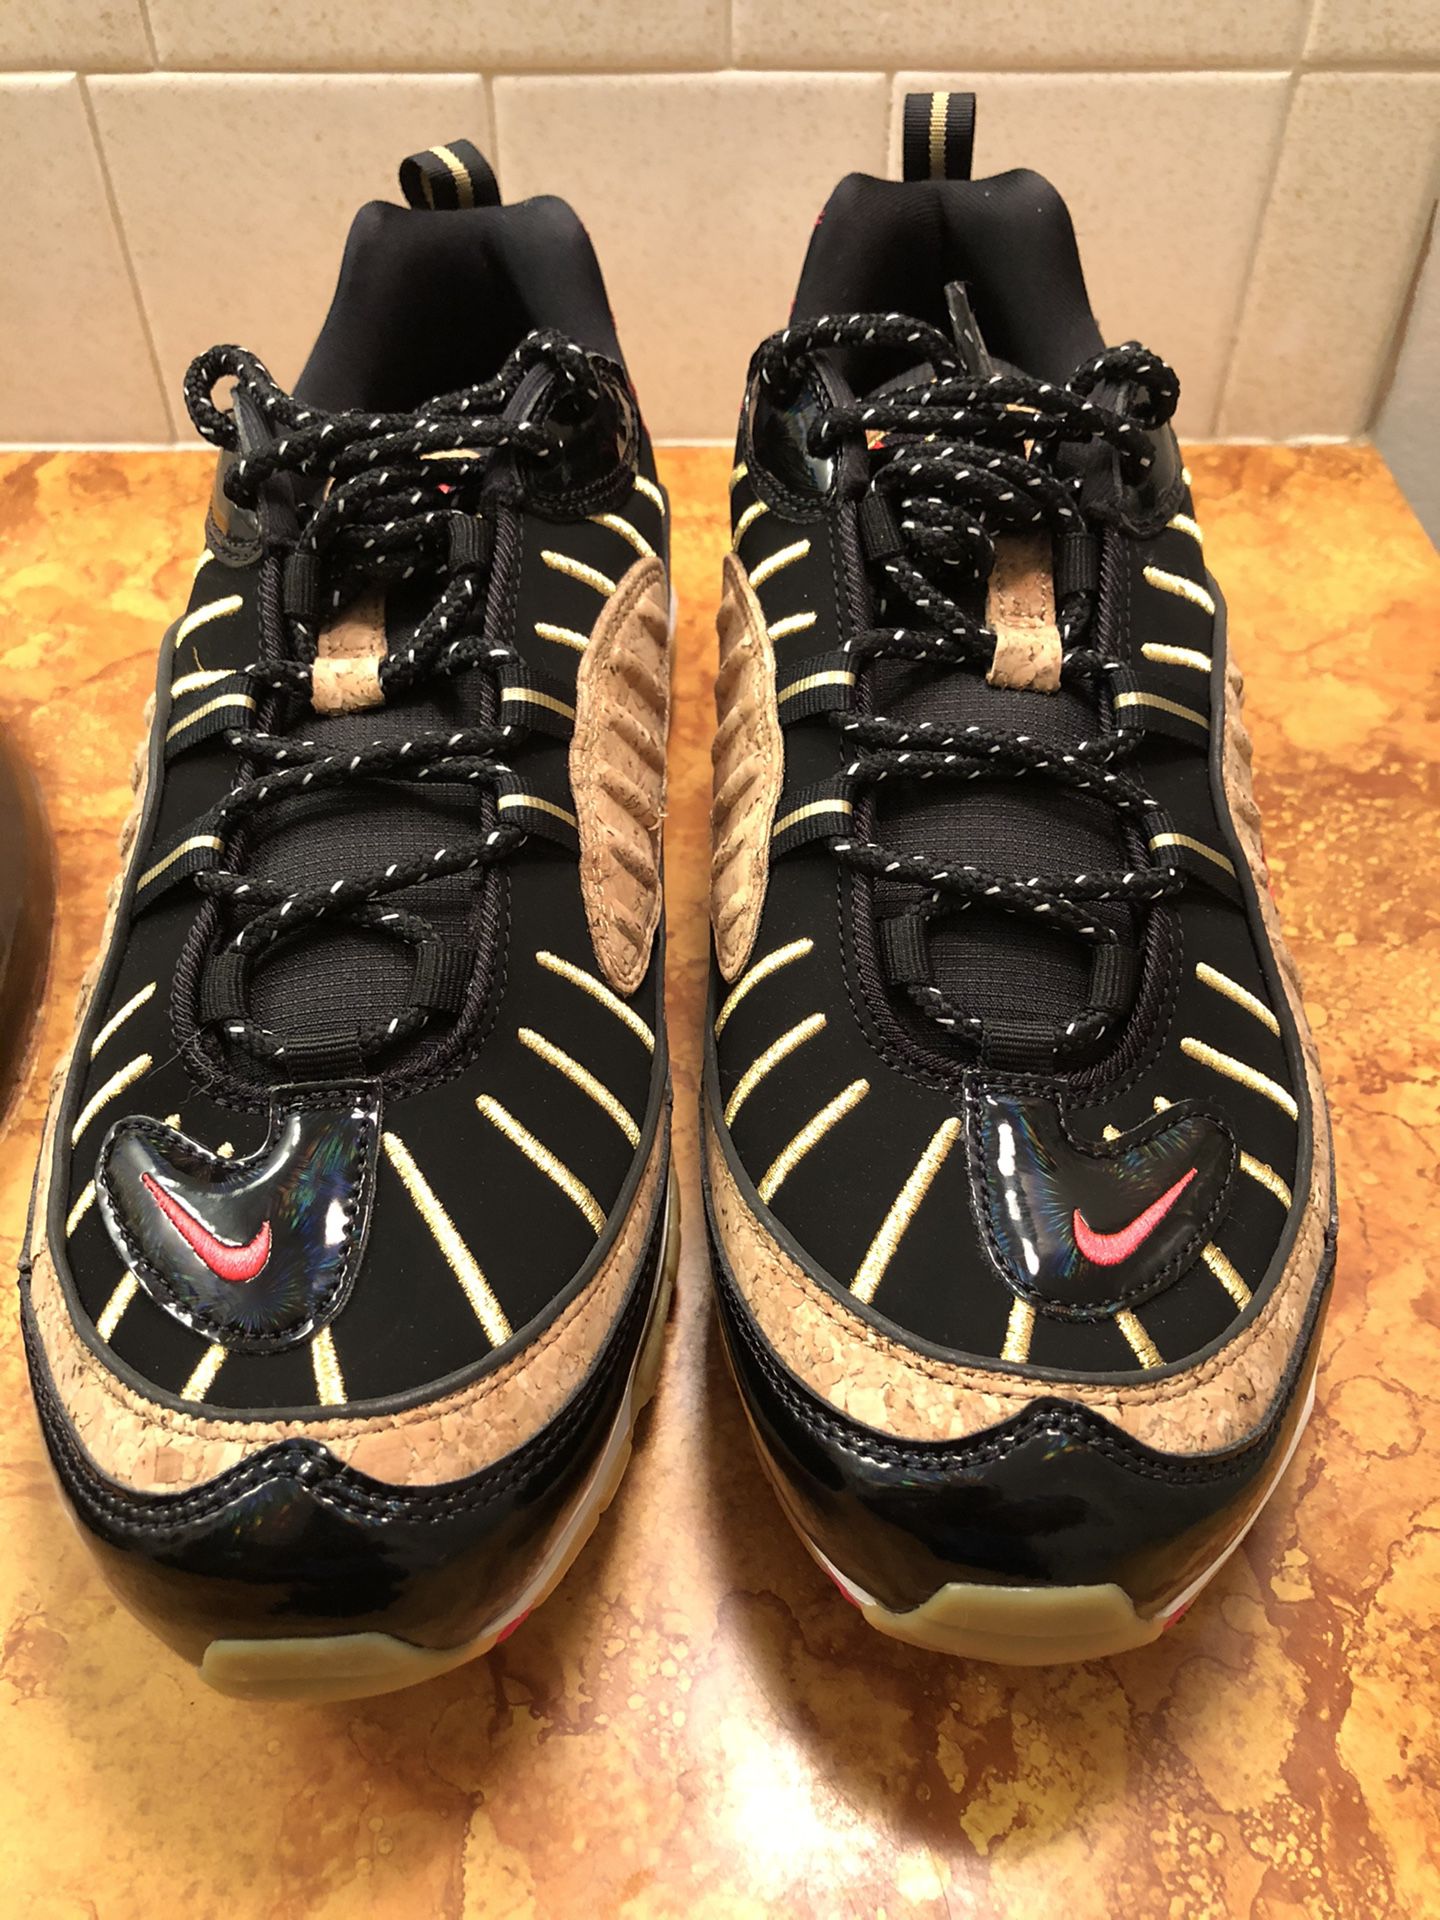 Nike Air Max 98 "New Year" Black Cork Red SZ 10 Running Shoes CT1173-001